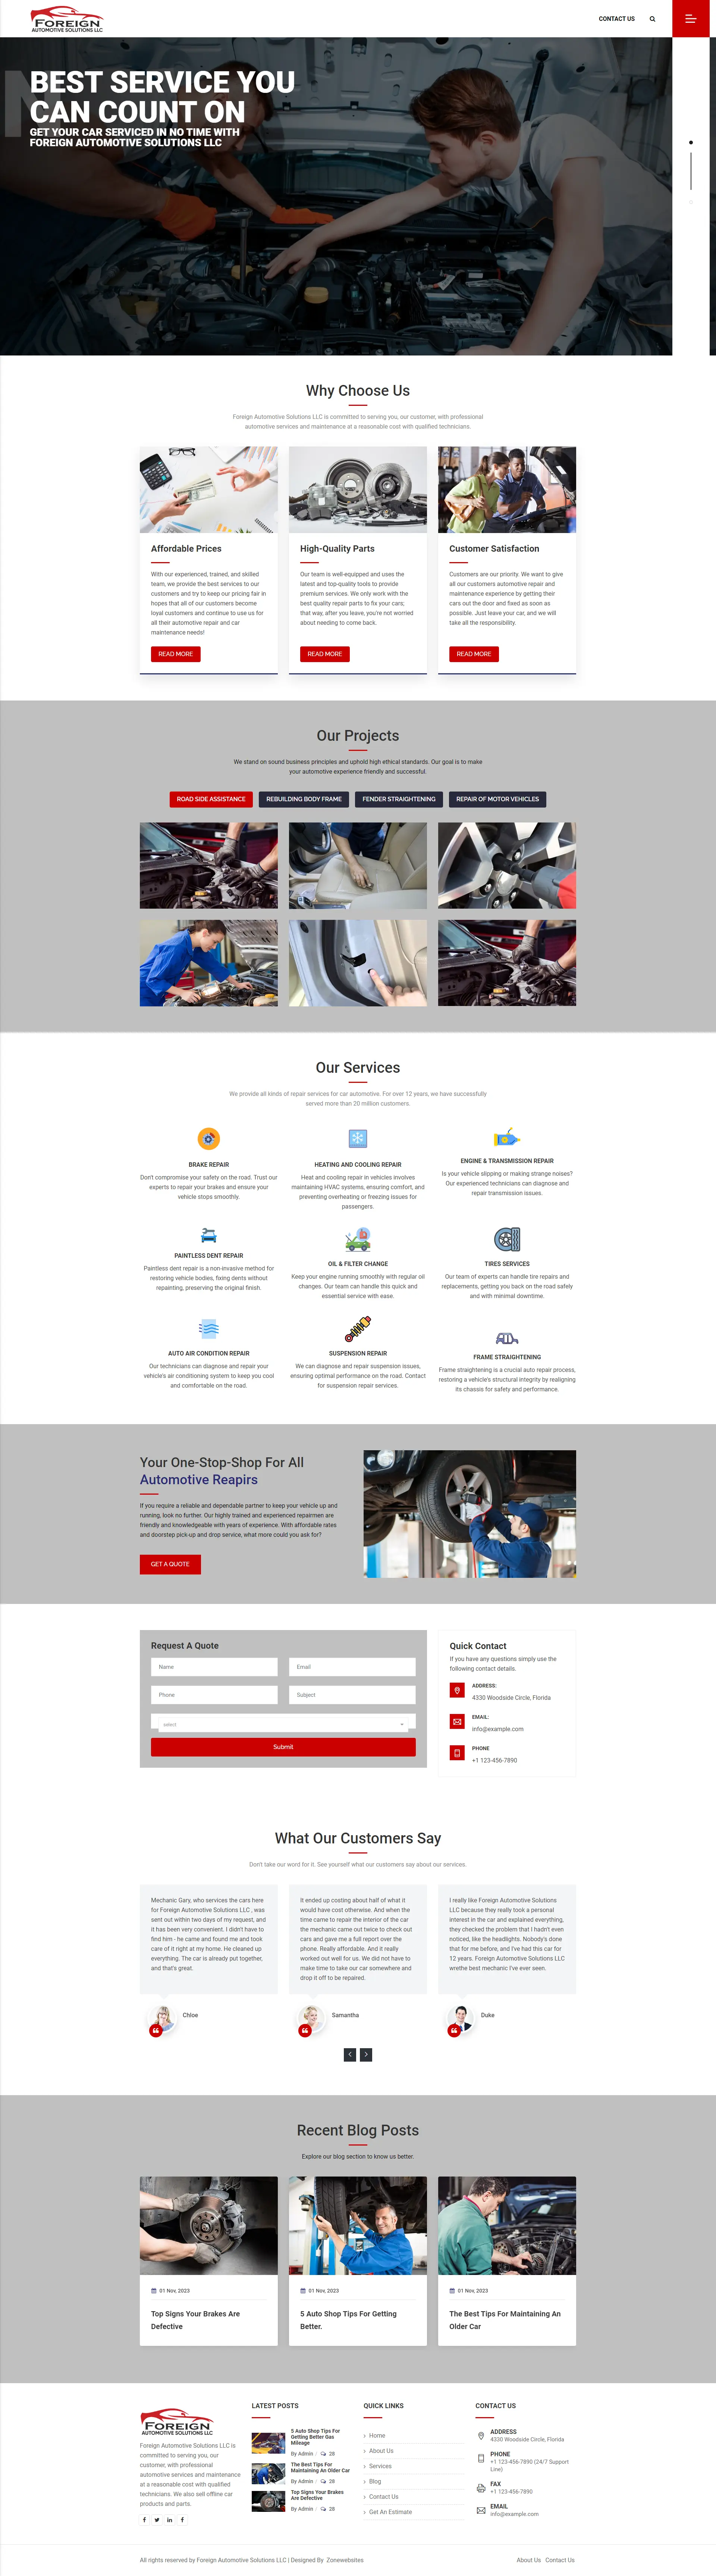 Foreign - Automotive Repairs Website Template